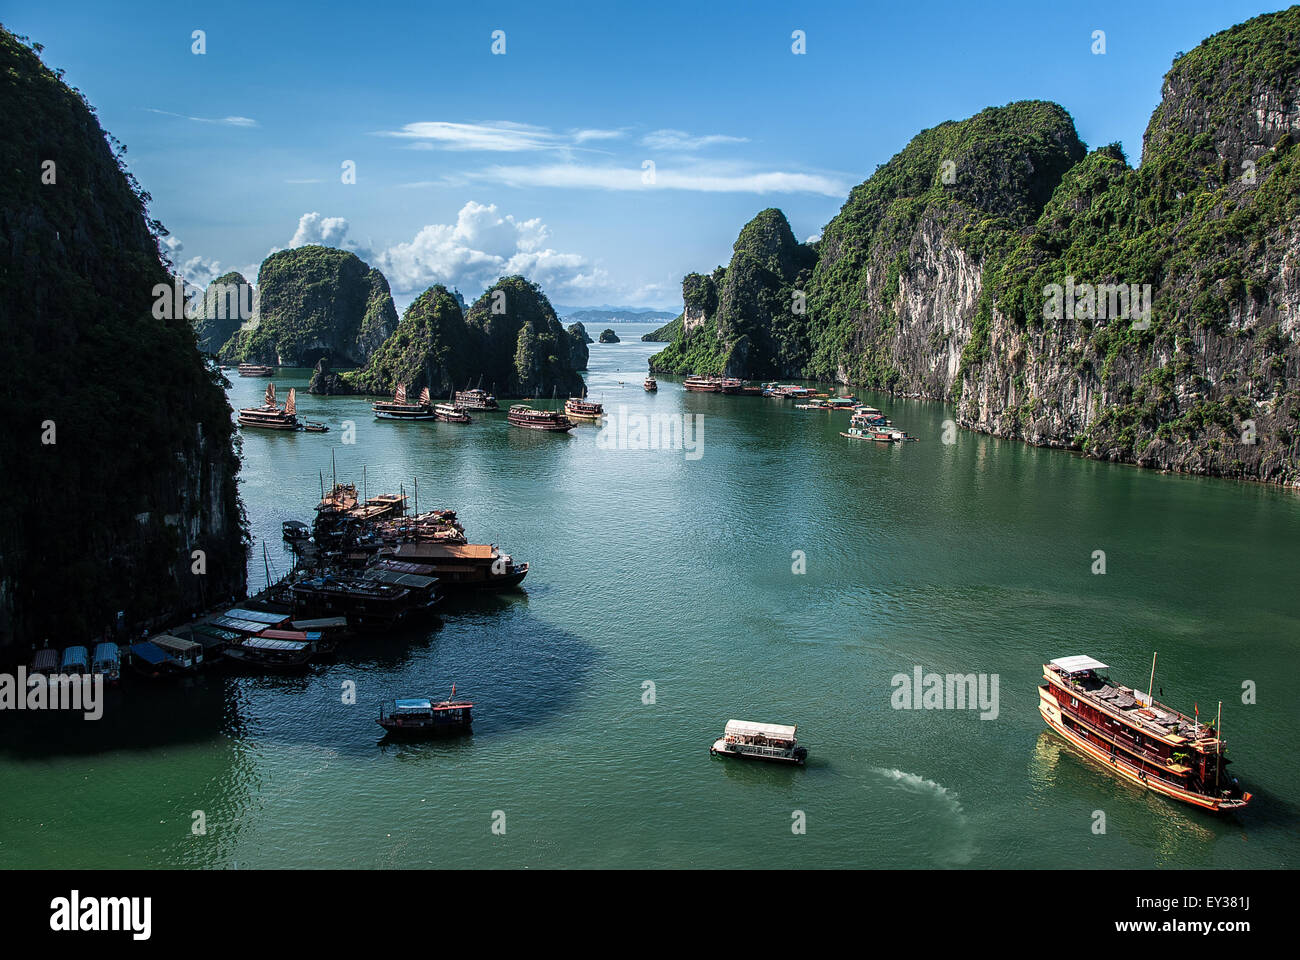 Halong Bay from above with some boats, clouds and karst formations composing the image. Stock Photo